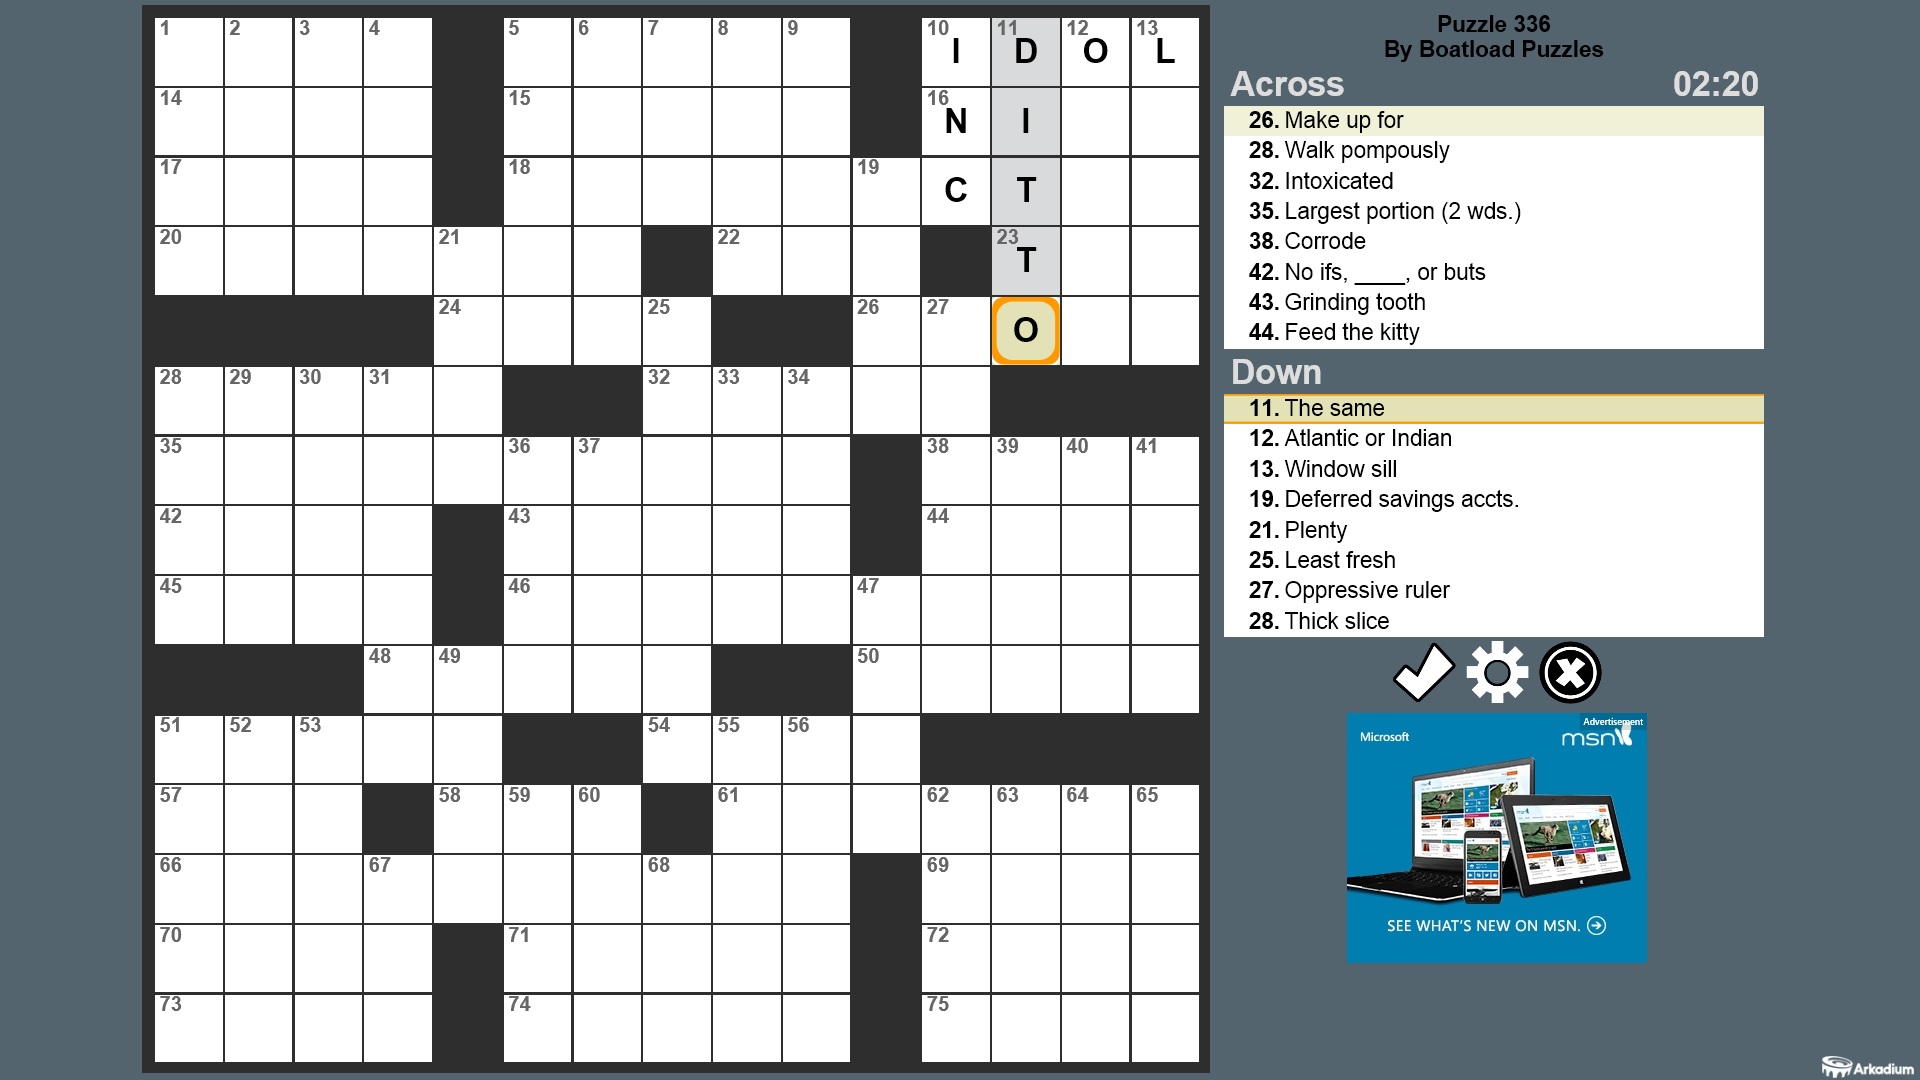 Crossword Fun offers an endless supply of crossword puzzles for you to solv...